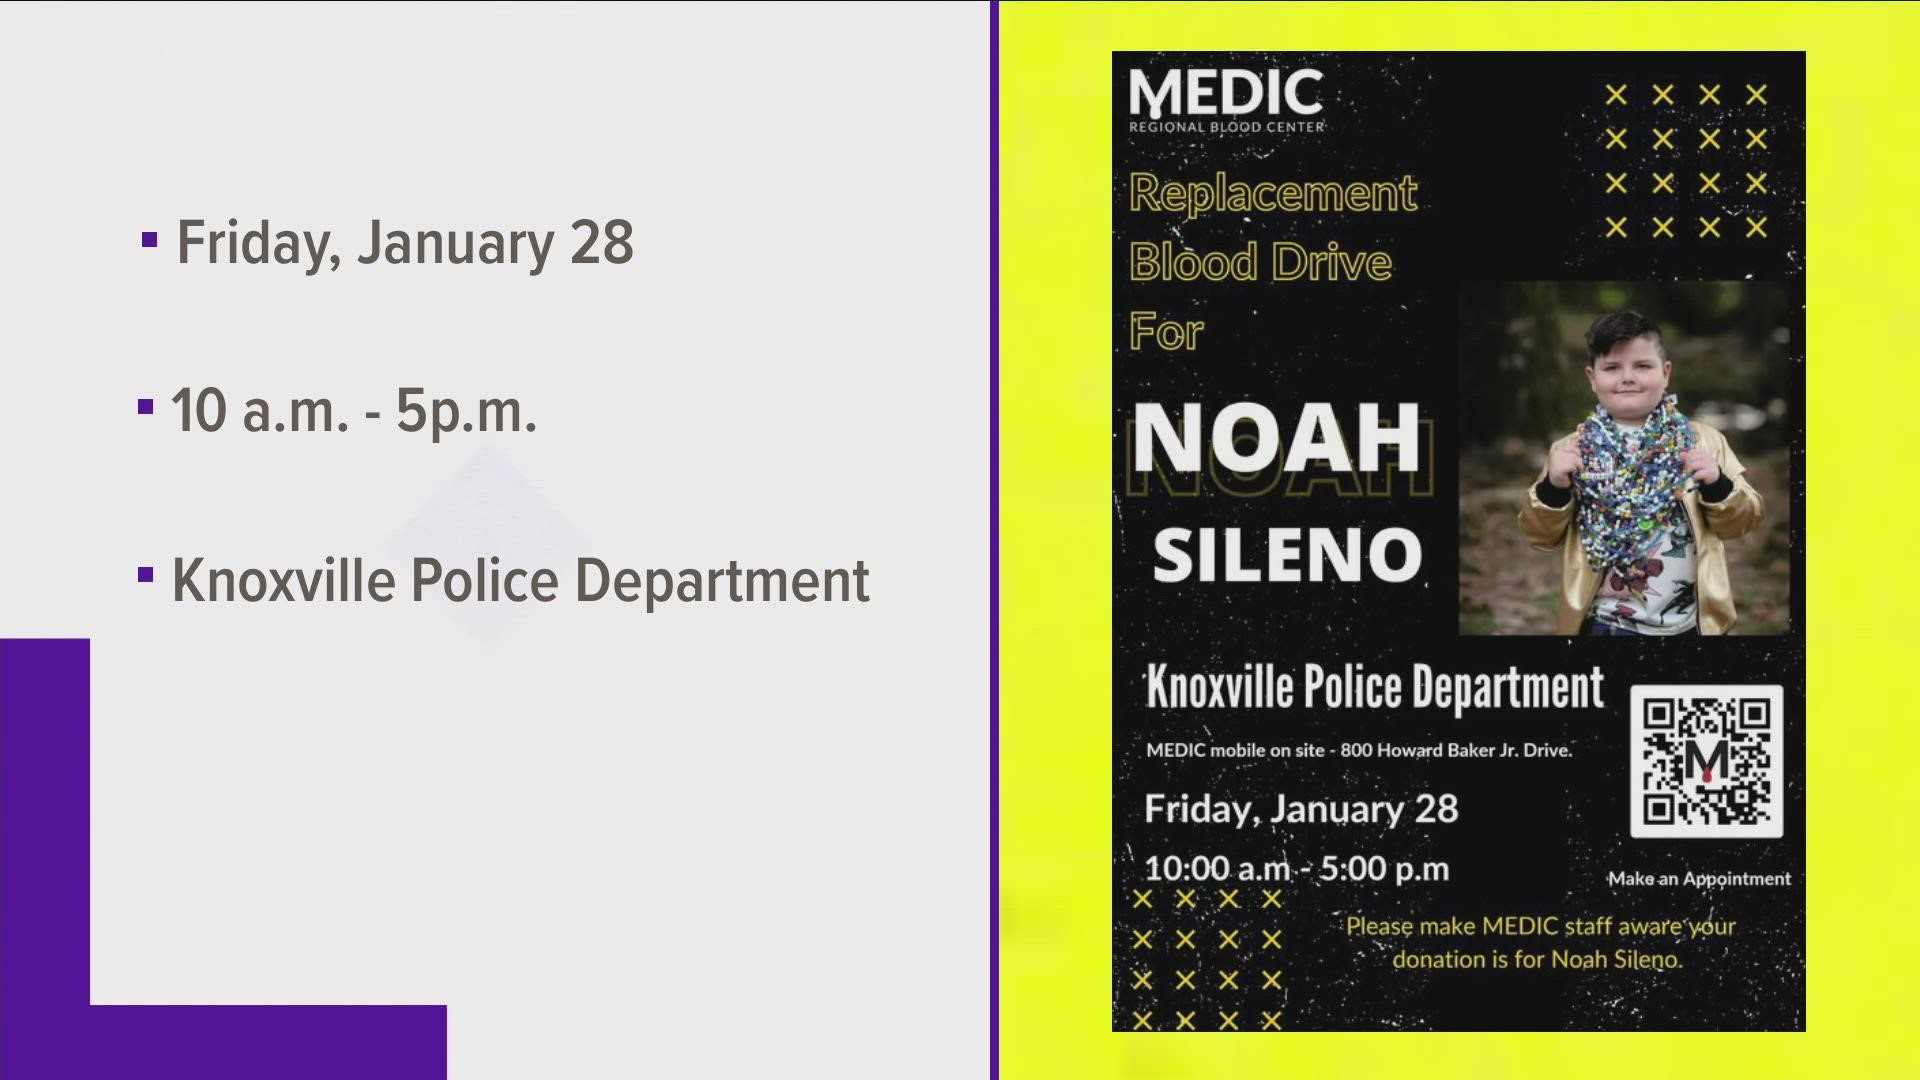 MEDIC's mobile bus will be parked at the Knoxville Police Department on Jan. 28 where people can donate blood, helping 6-year-old Noah Sileno fight cancer.